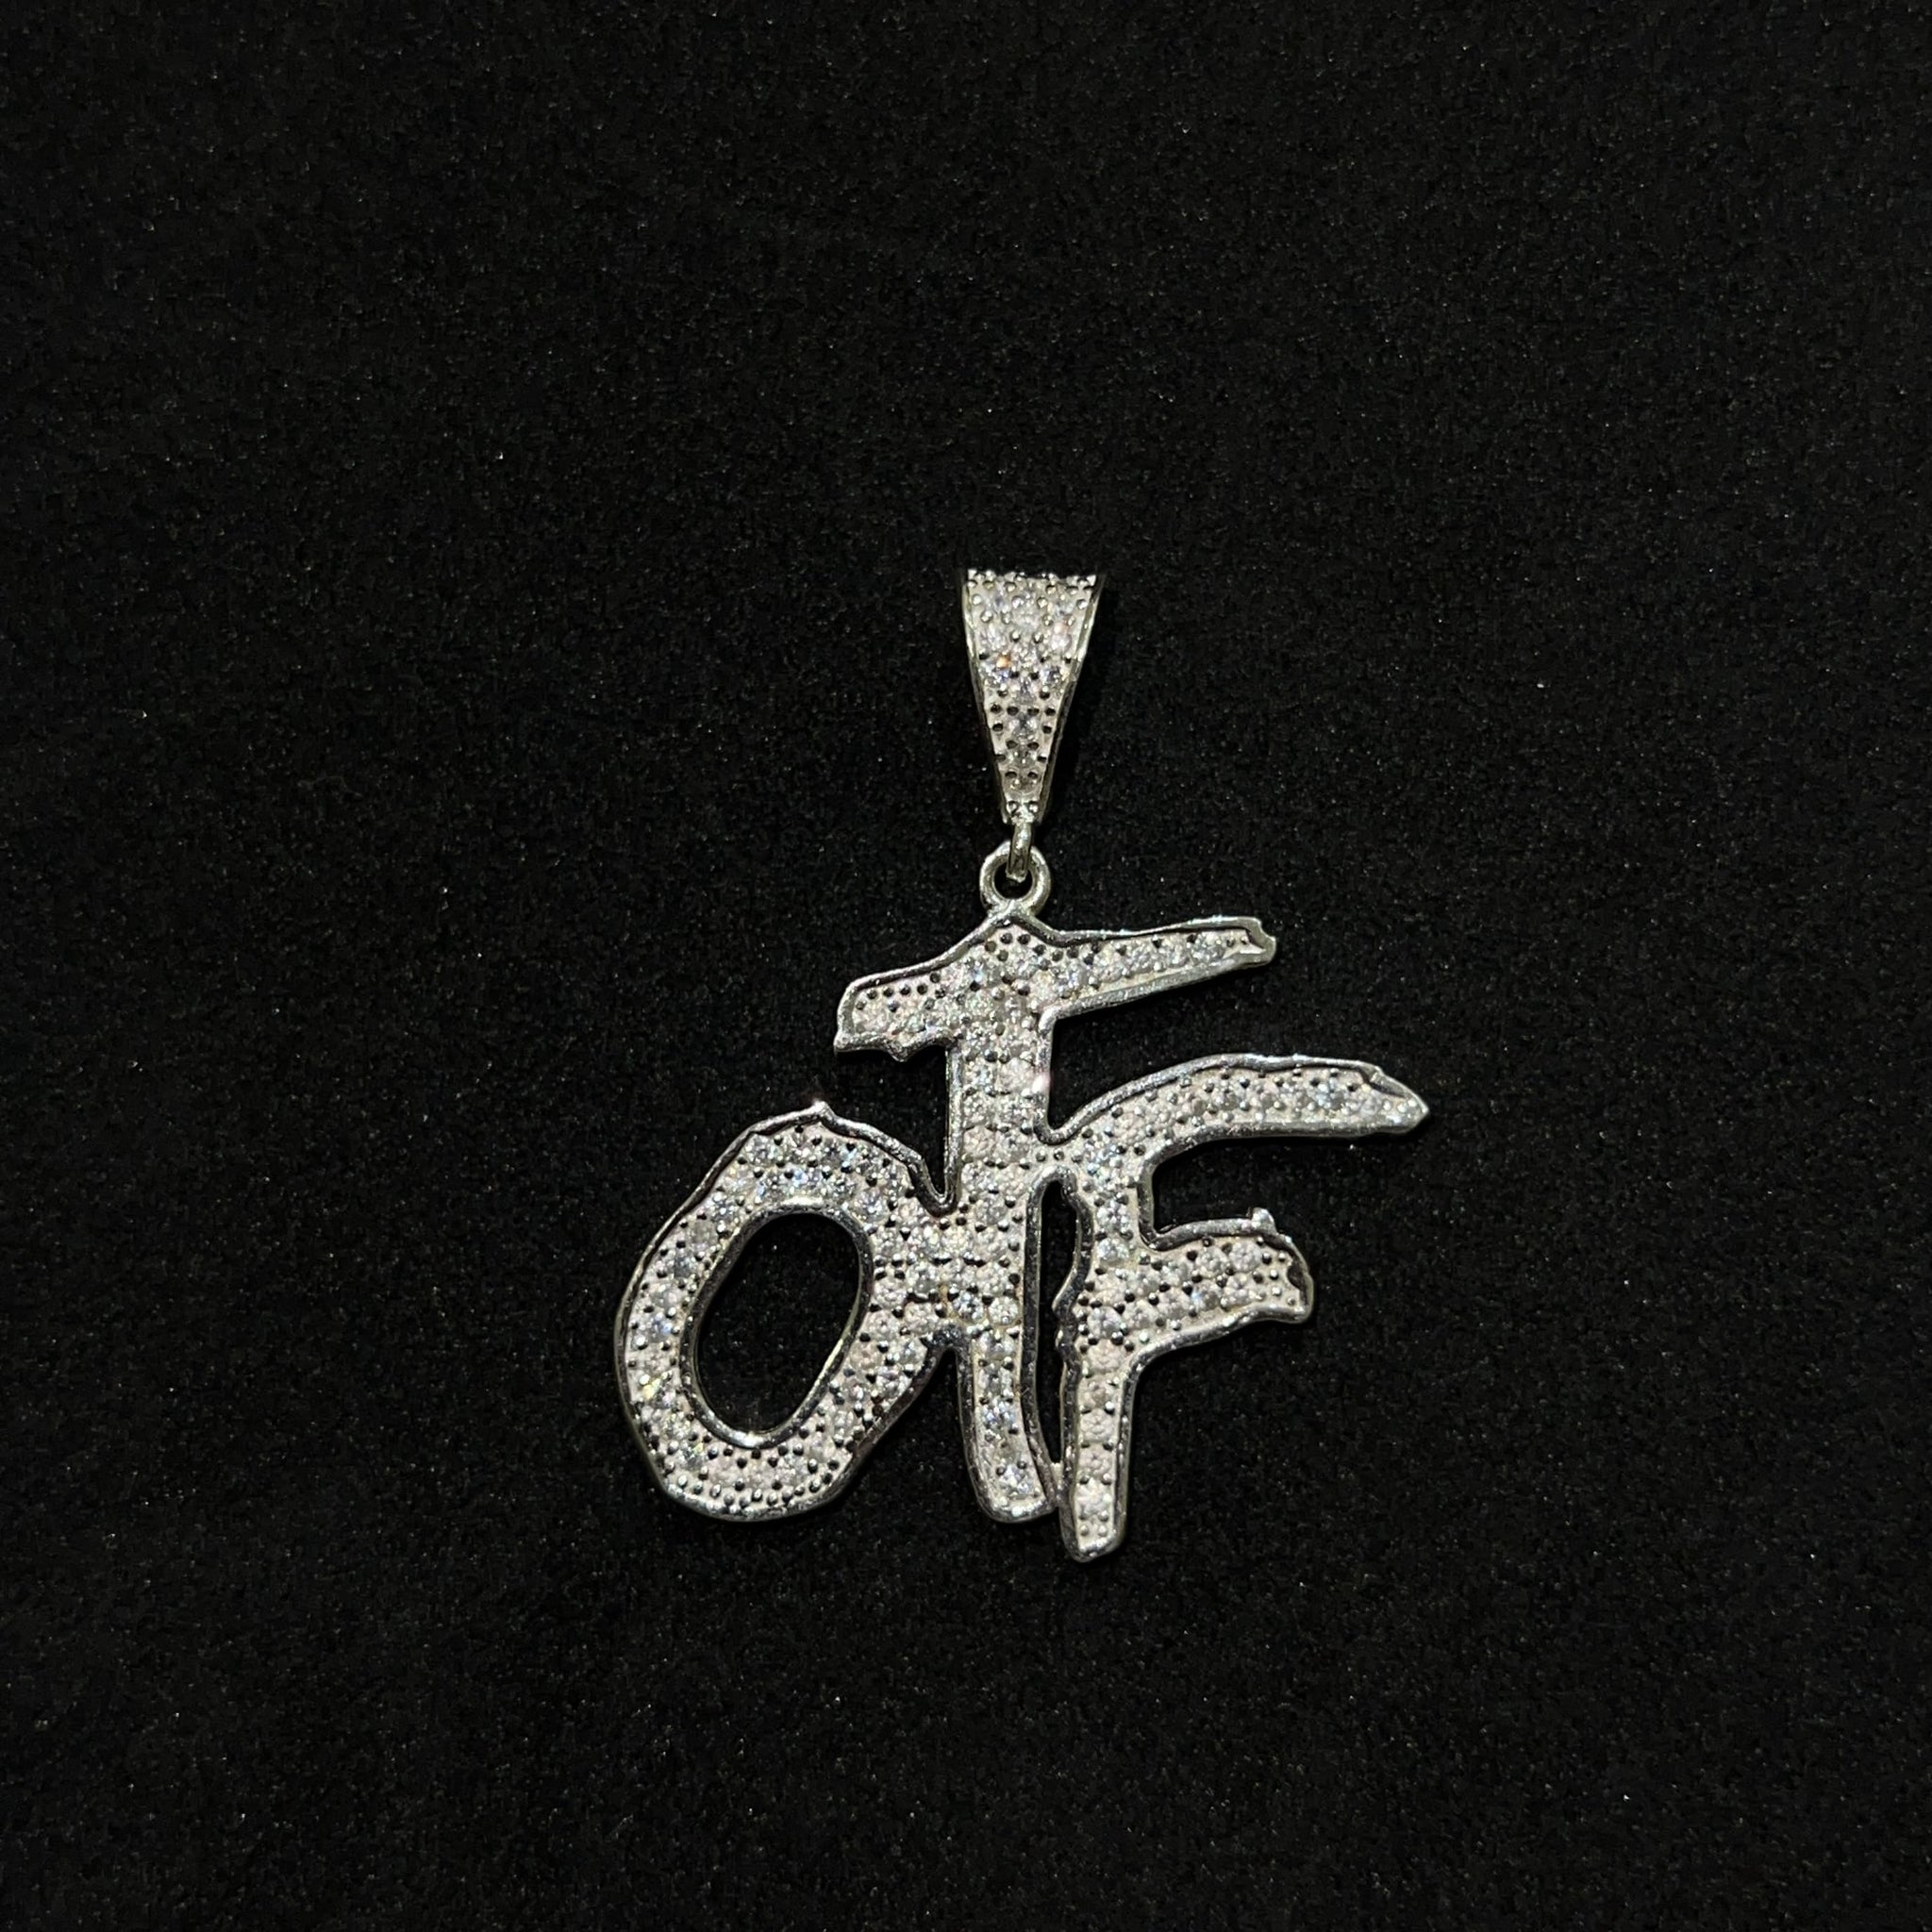 Mid-Size OTF (Only the Fam) Pendant - Iced Out - Silver 925